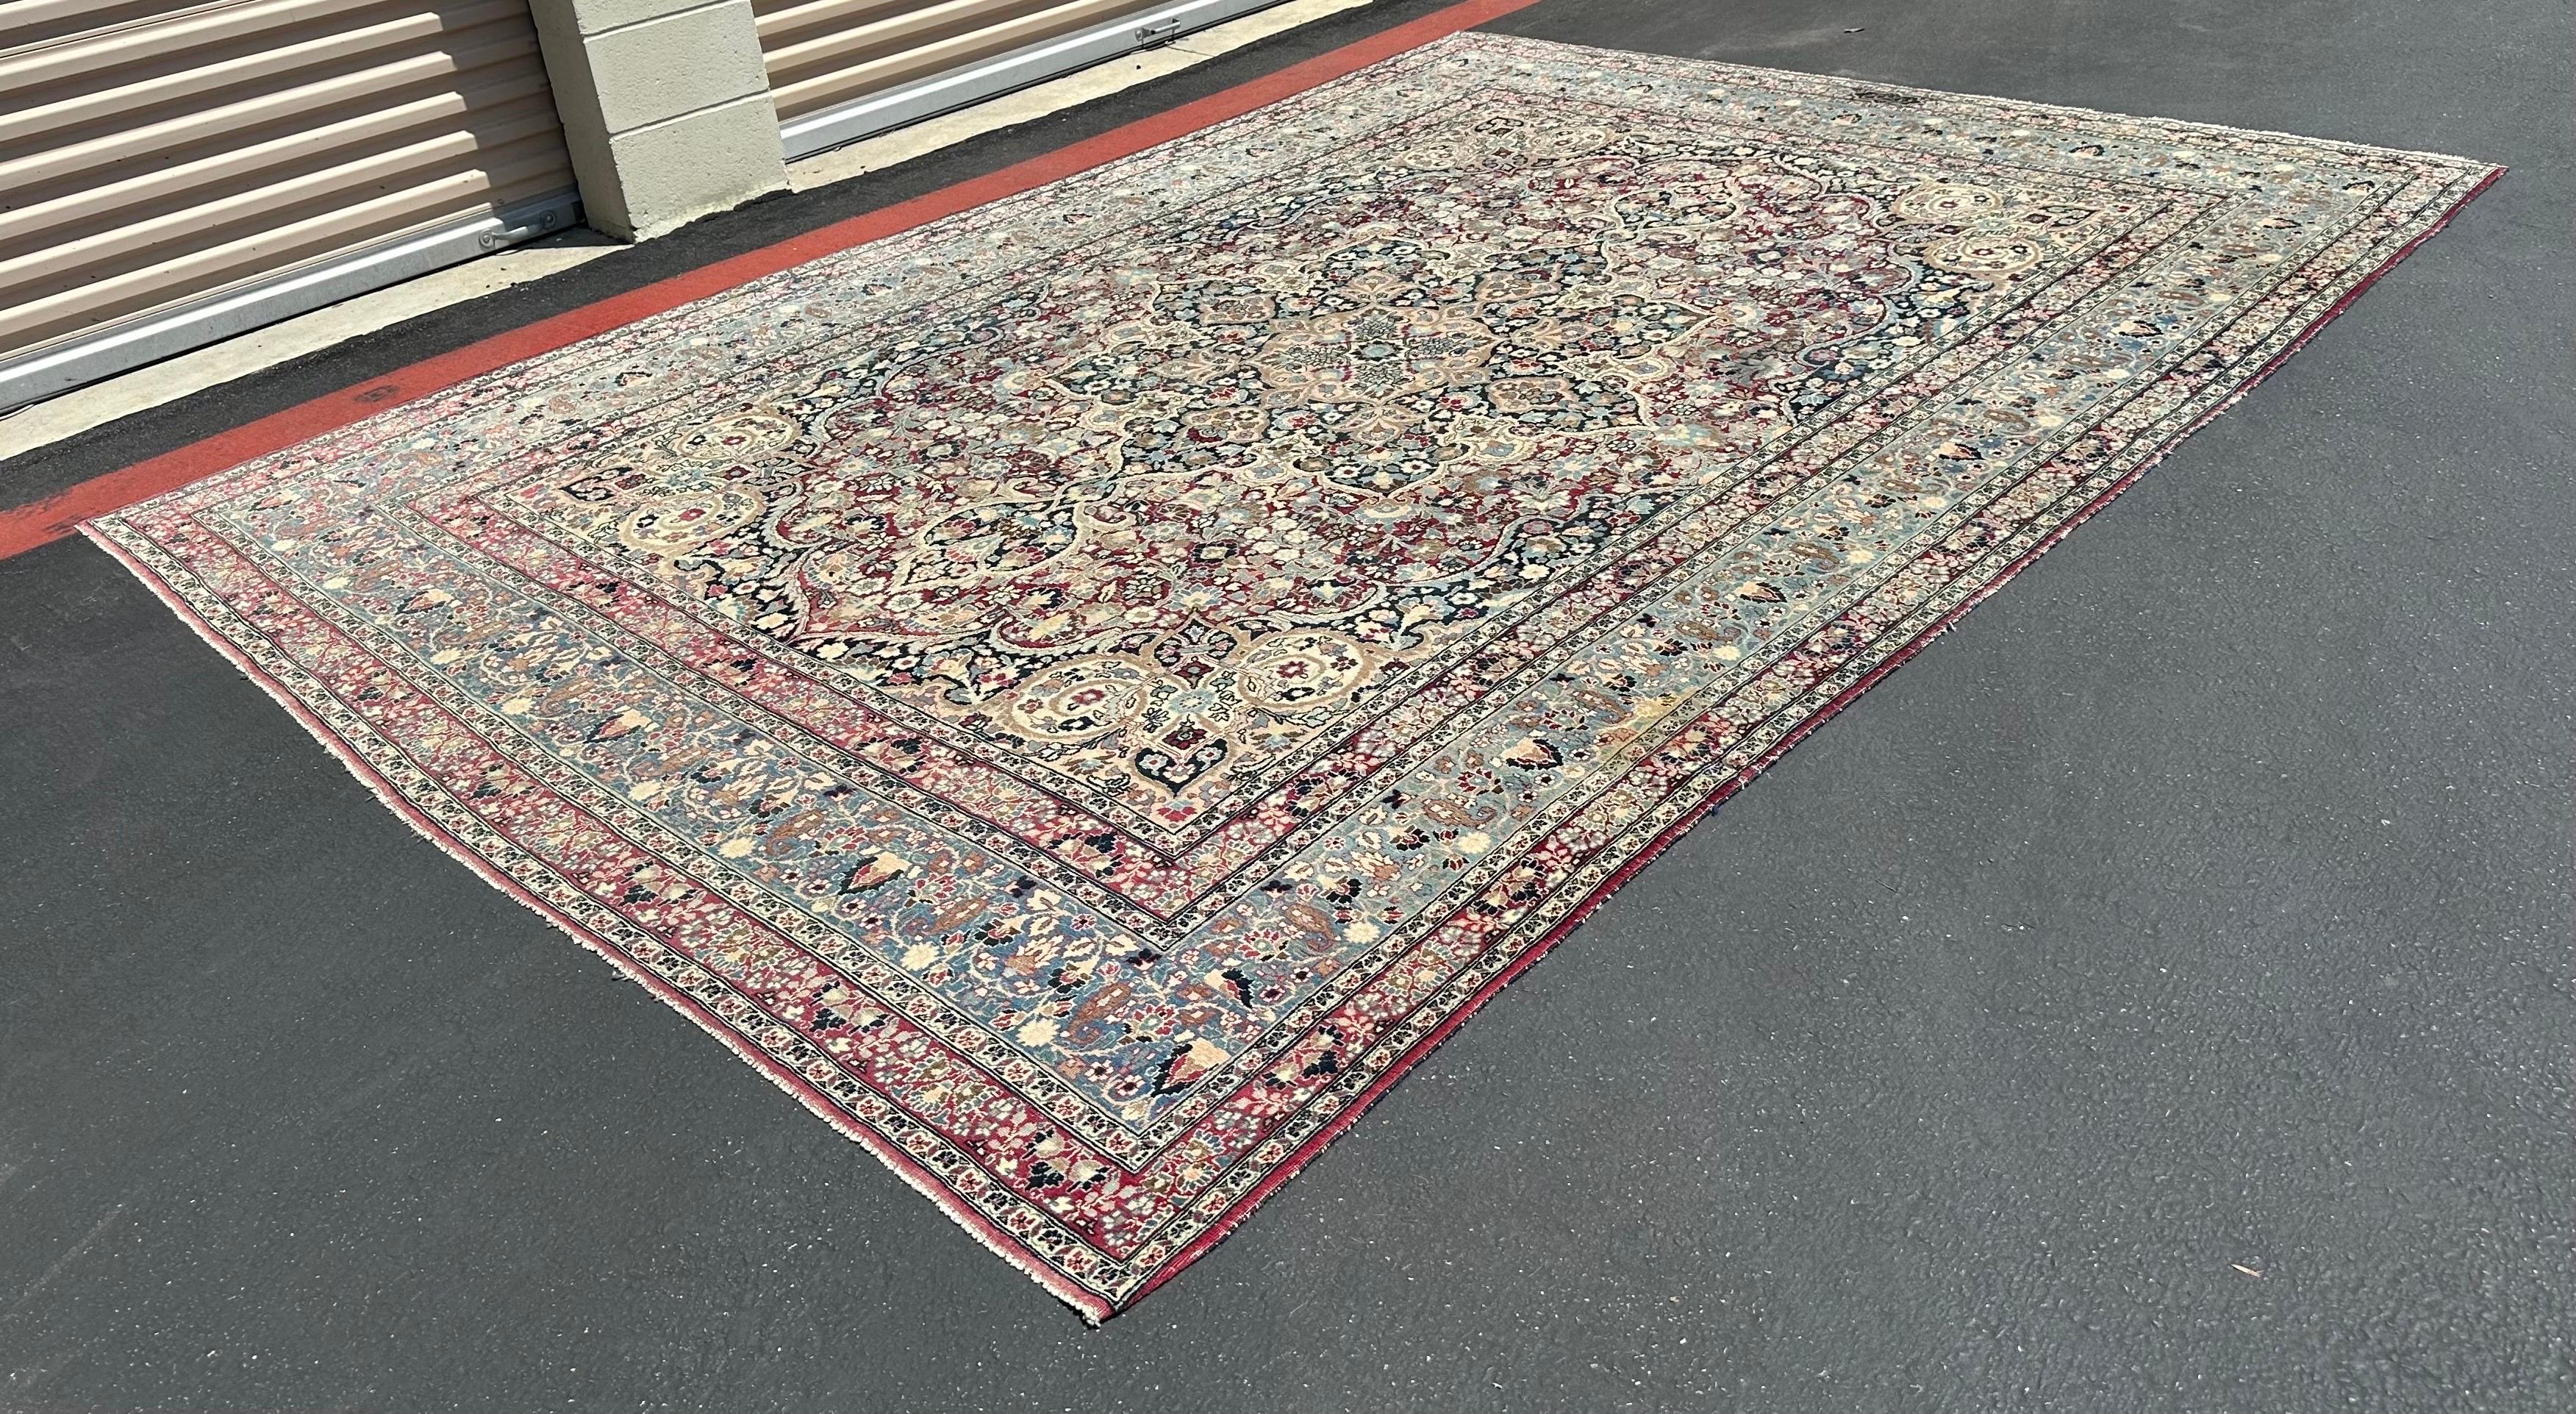 Amazing antique Persian rug. In good condition. No holes on it. Very well kept. So many details. Beautiful colors. 
Dimensions: 137in by 100in